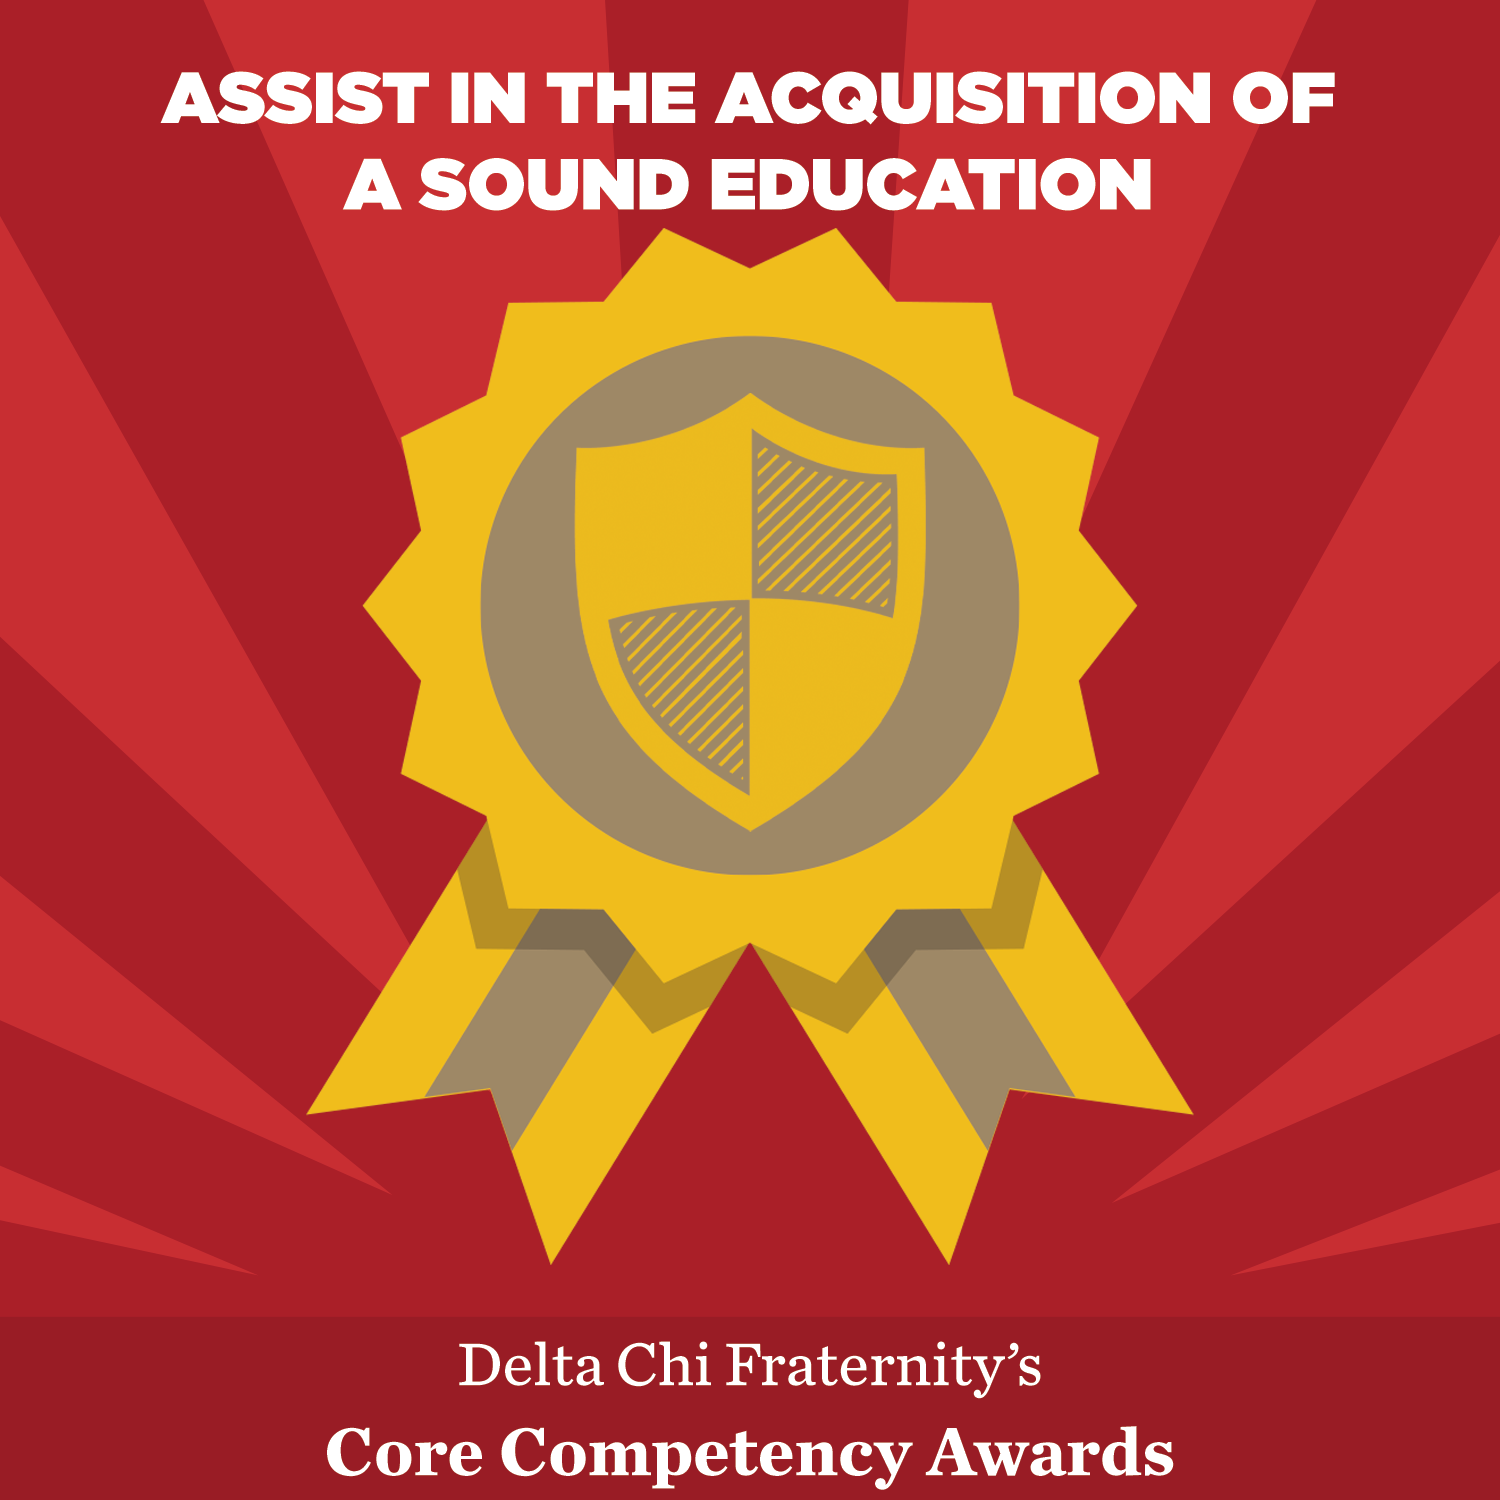 Core Competency Awards (Assist in the Acquisition of a Sound Education)